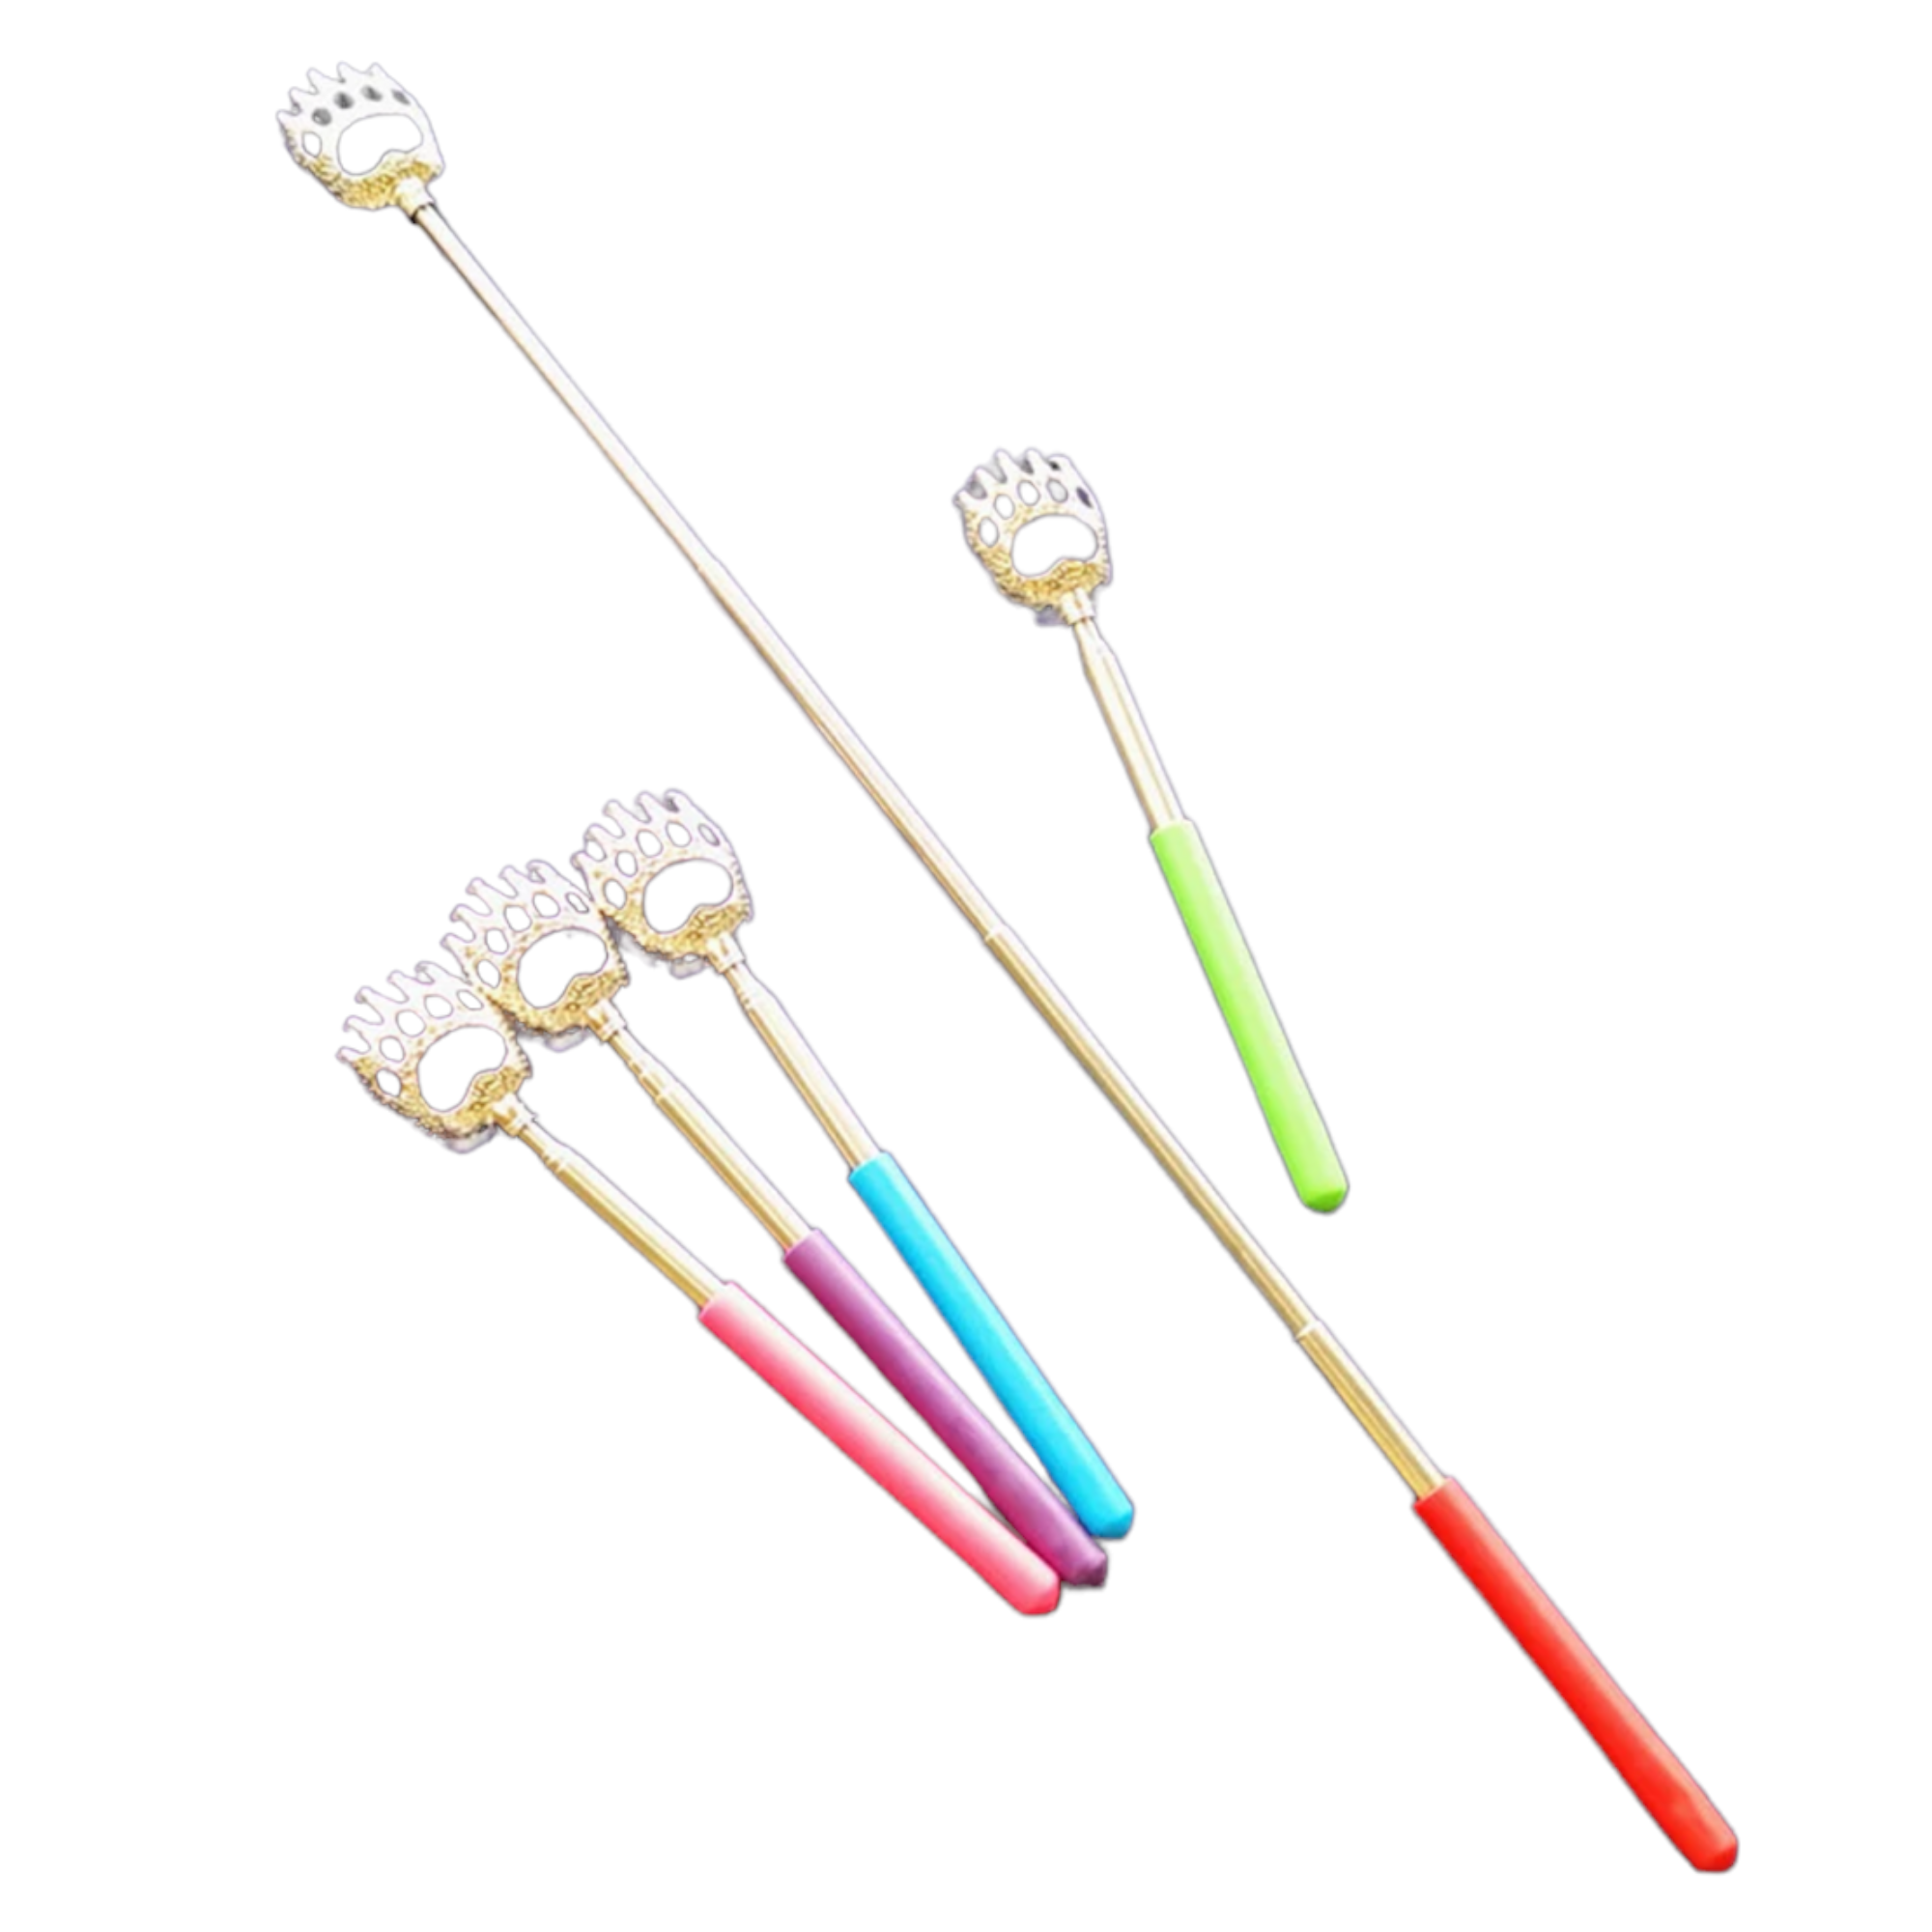 2 Non-slip Handy Bear Claw Back Scratcher Durable Portable Telescopic Stainless Steel Body